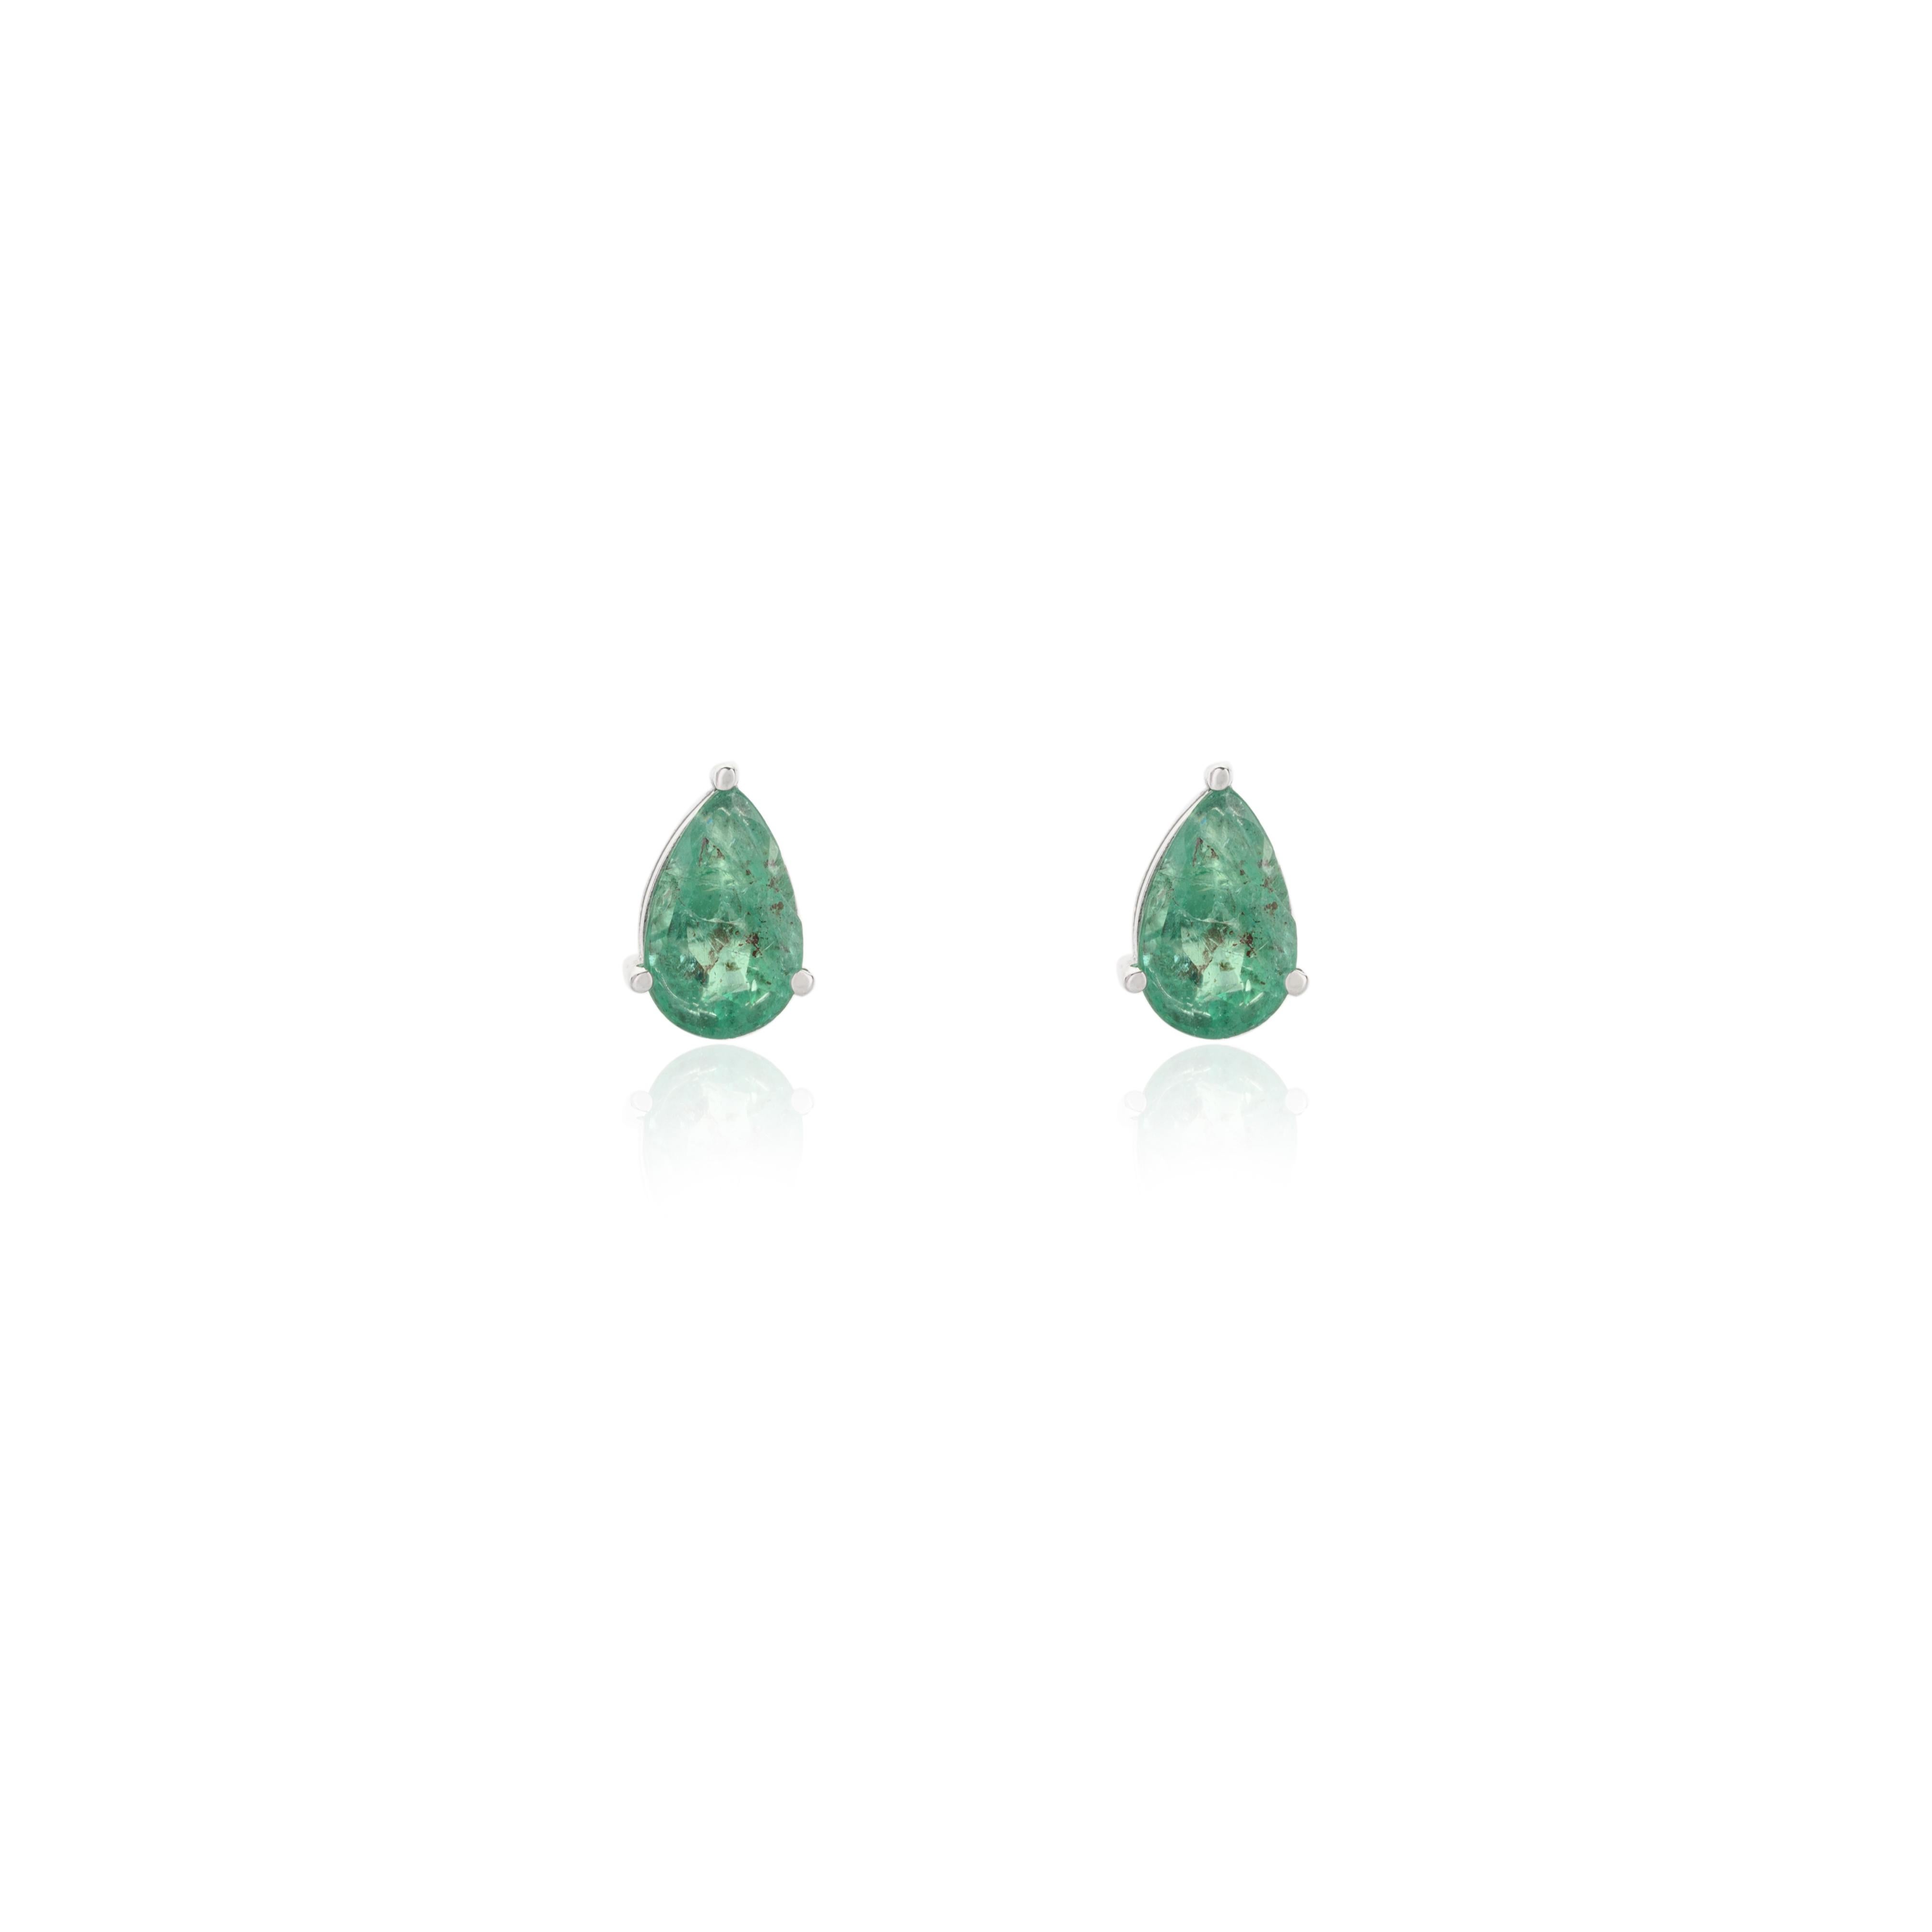 For Sale:  Dainty Emerald Ring and Earrings Jewelry Set Made in 18k Solid White Gold 4